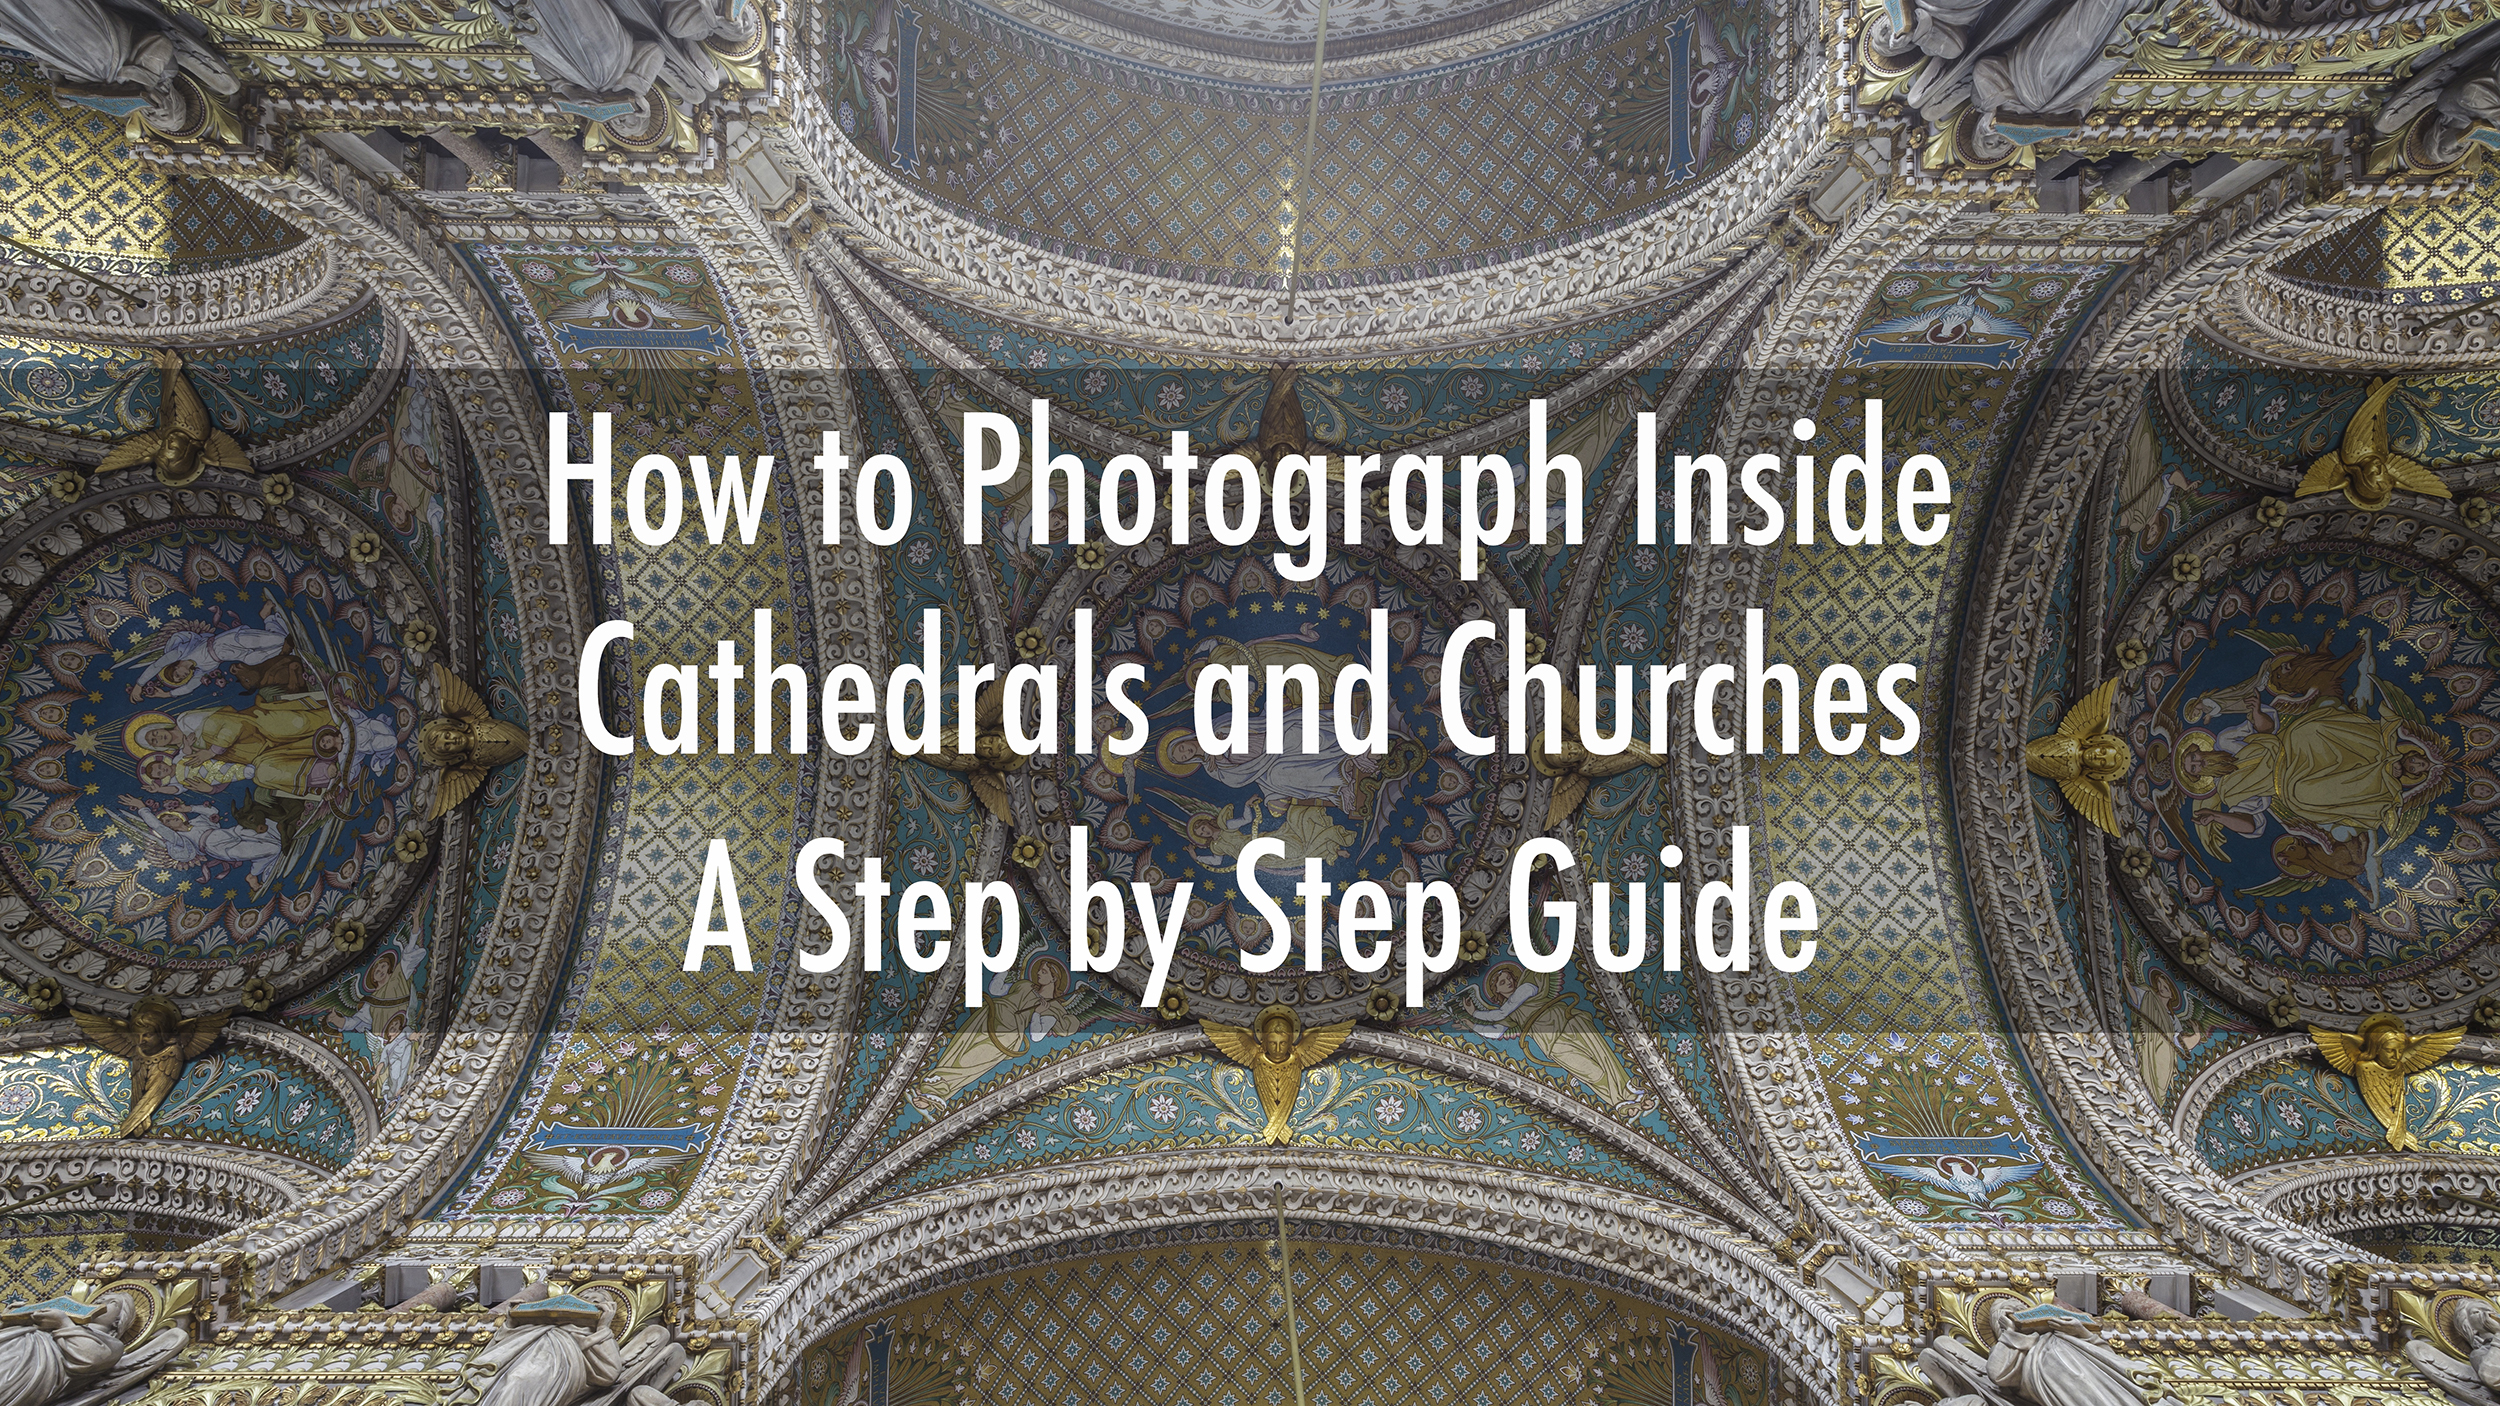 How to photograph inside cathedrals, abbeys and churches.